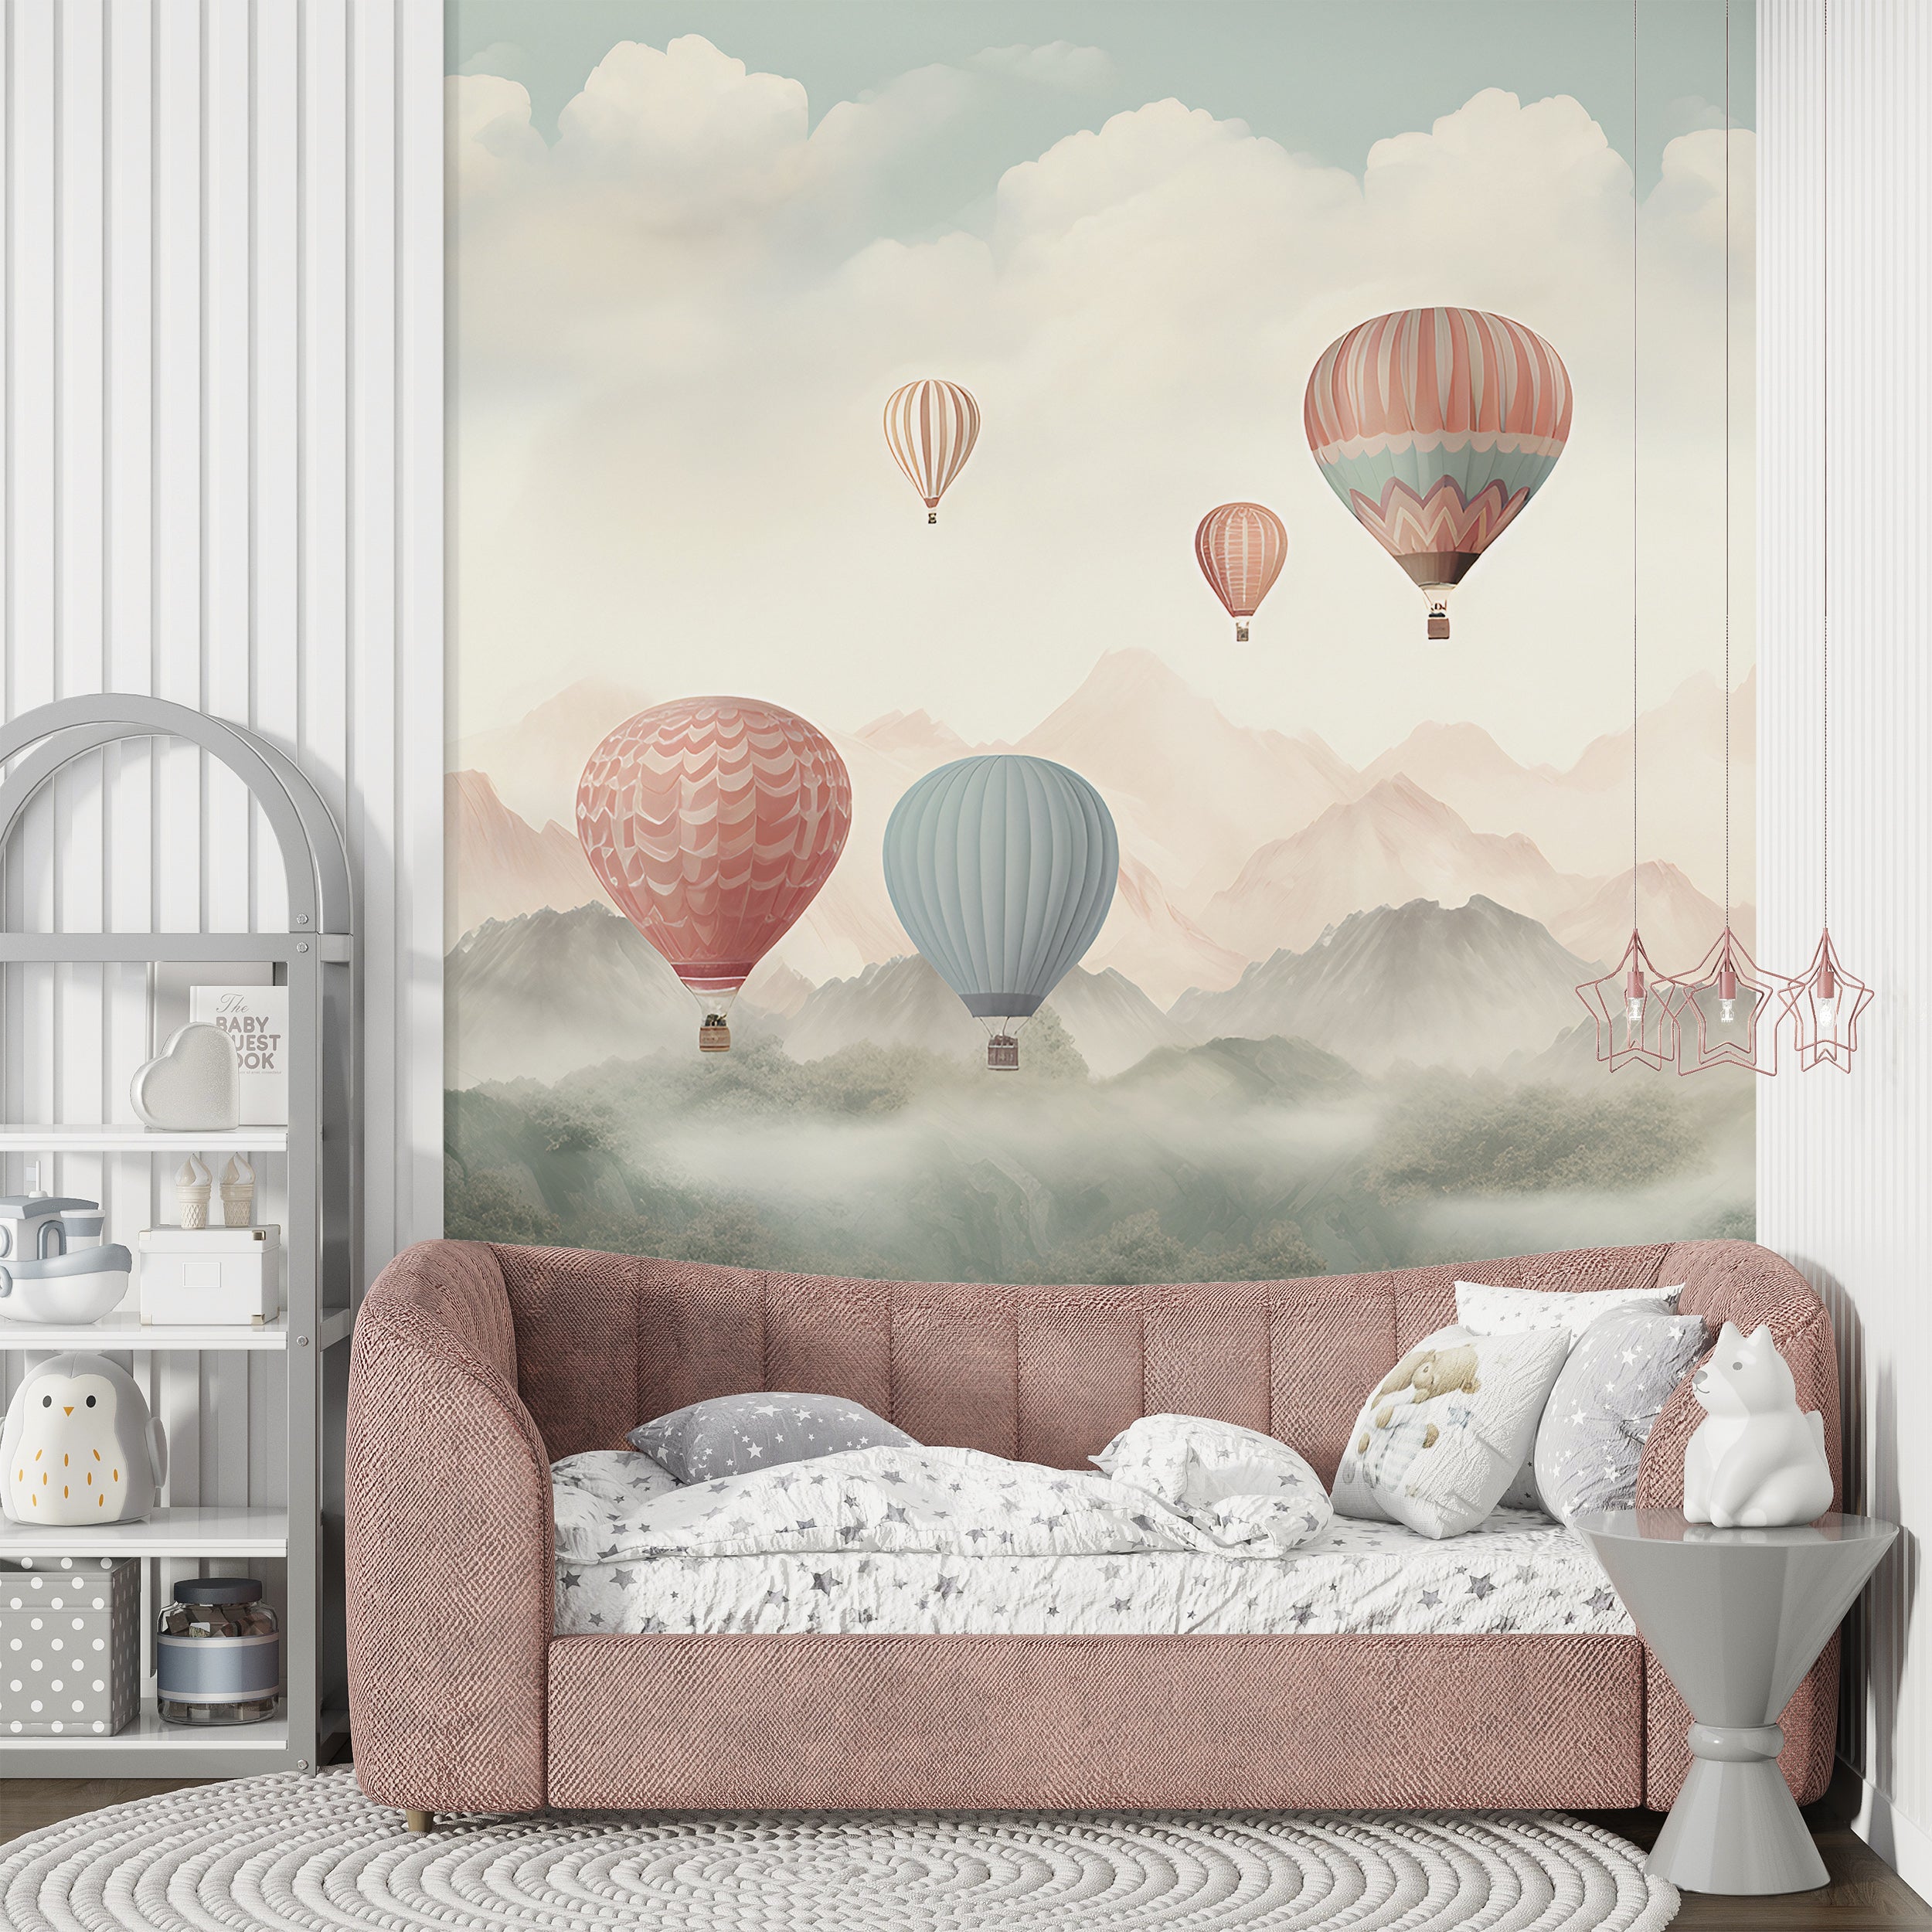 Create a Playful Space with Balloon Theme